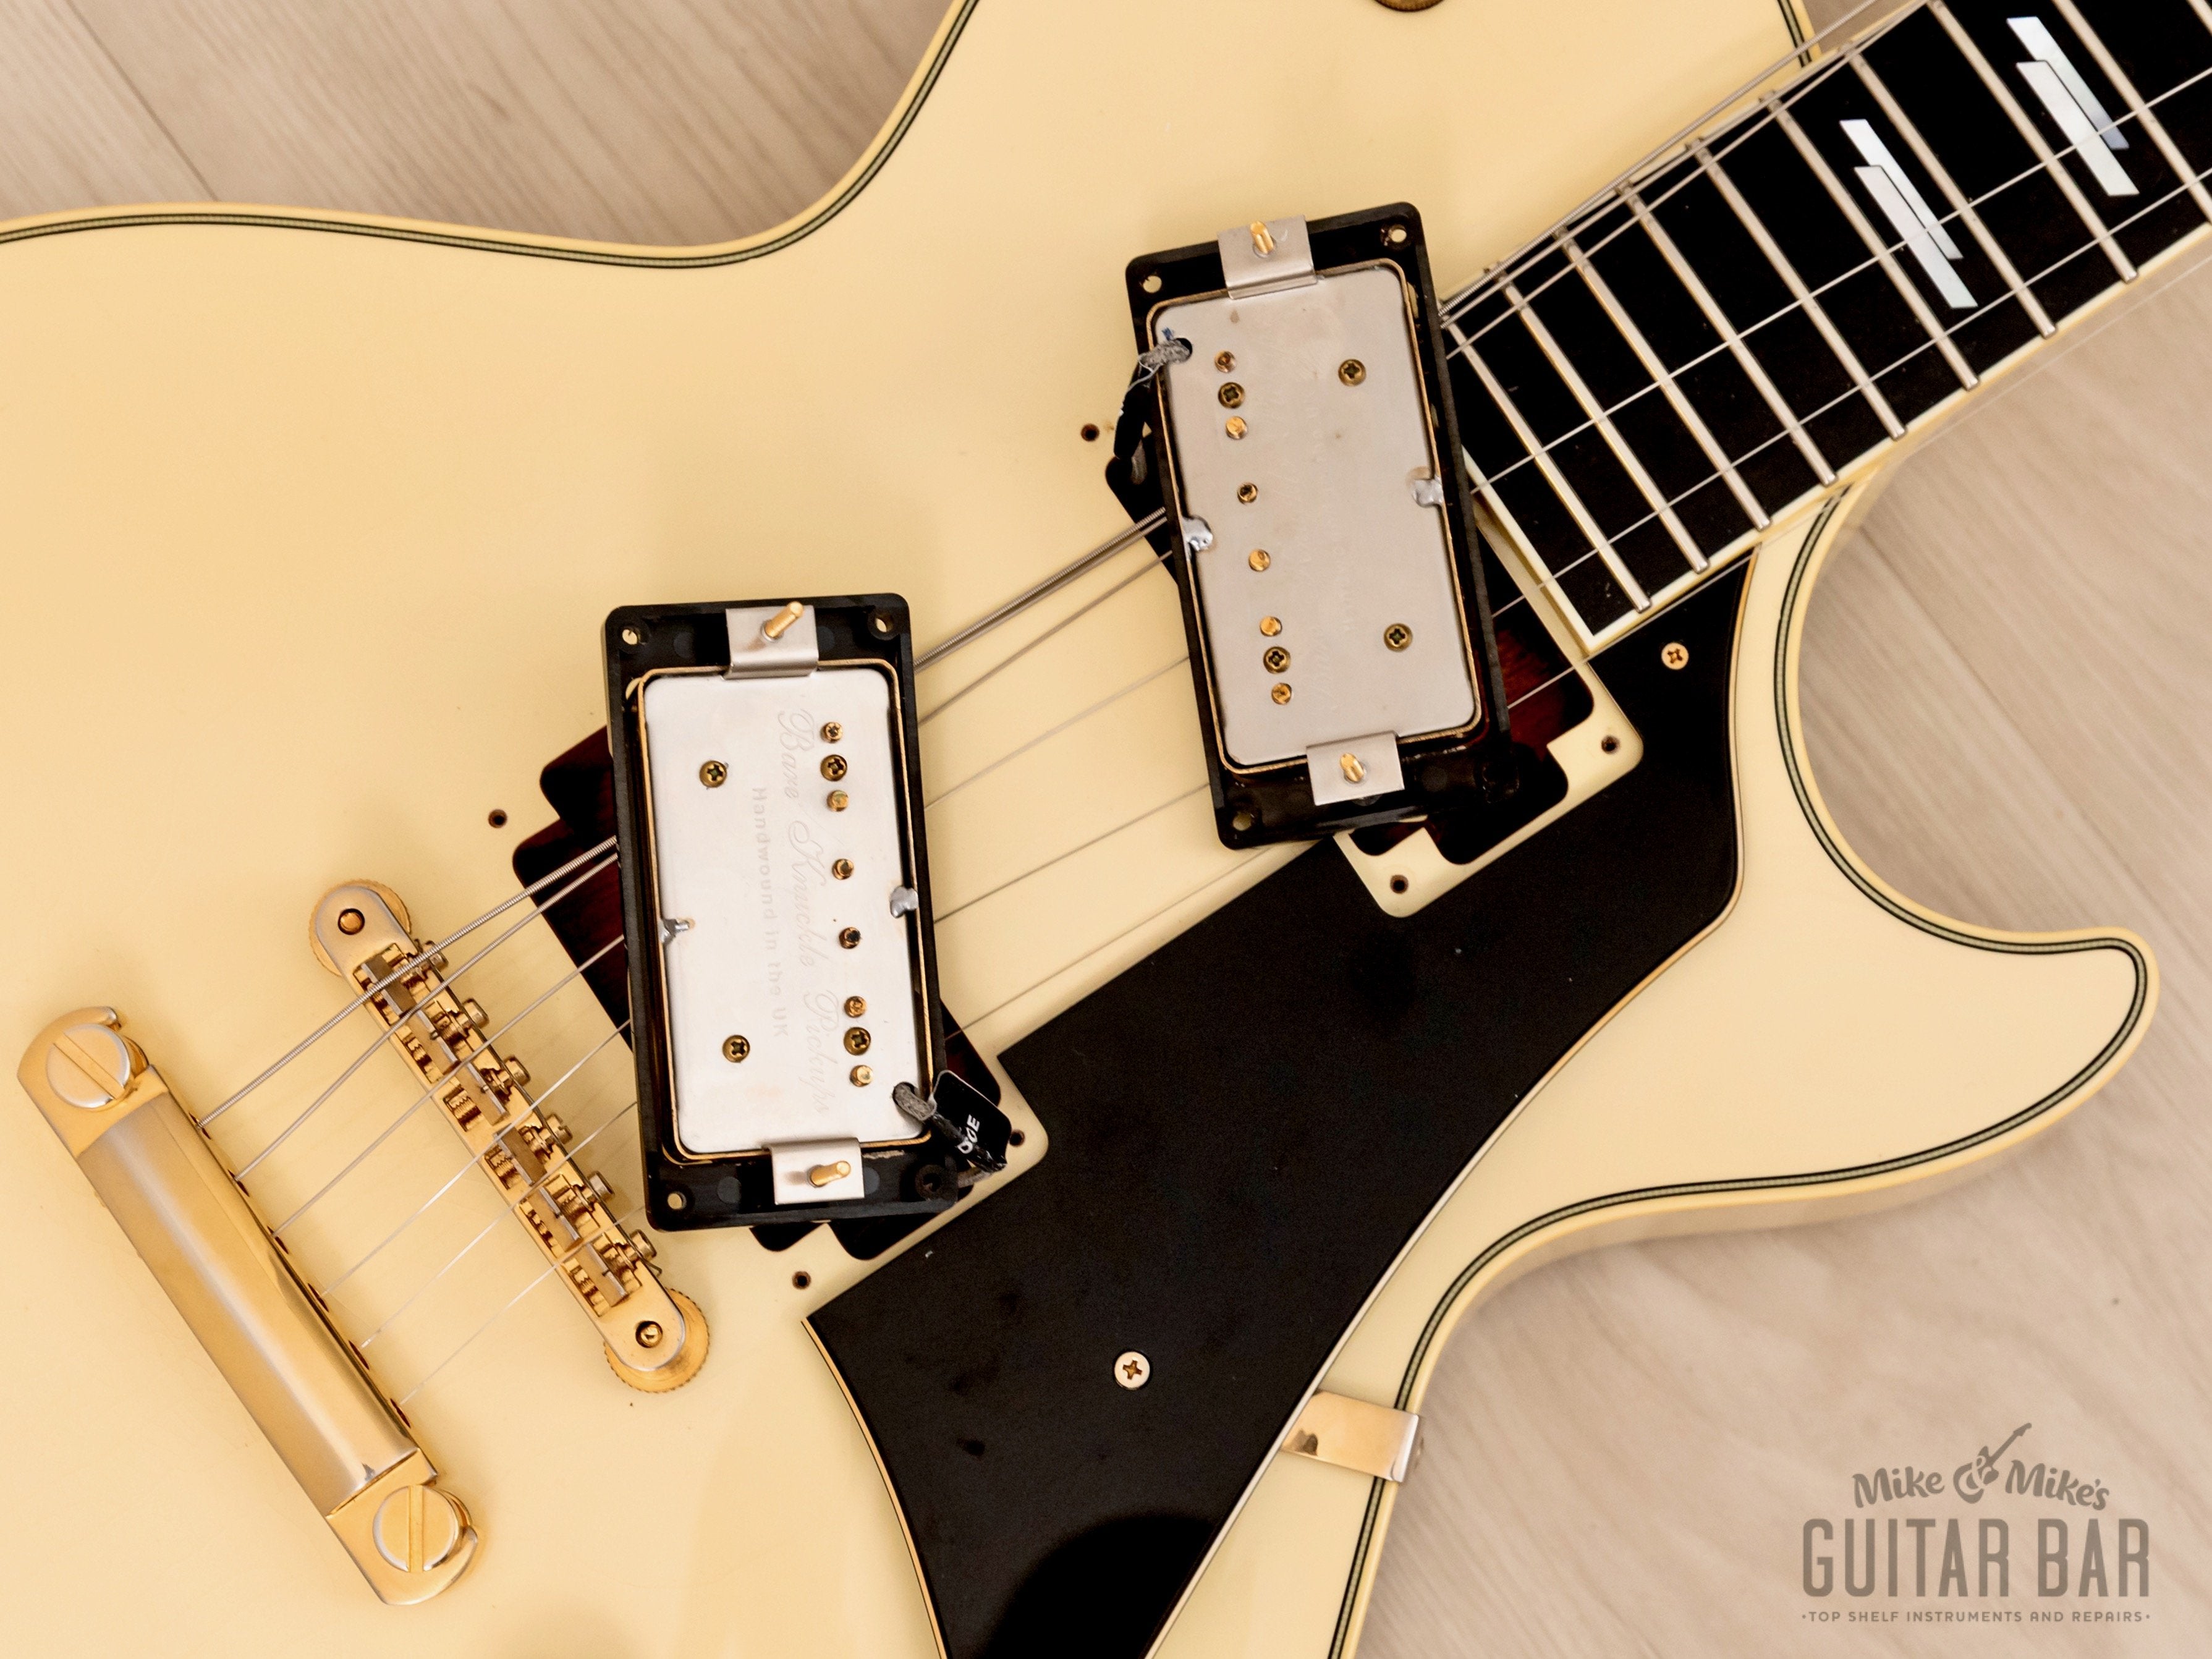 2021 Collings City Limits Deluxe Aged Olympic White Near-Mint w/ Mahogany Top, Bare Knuckle Black Dog, Case & Tags